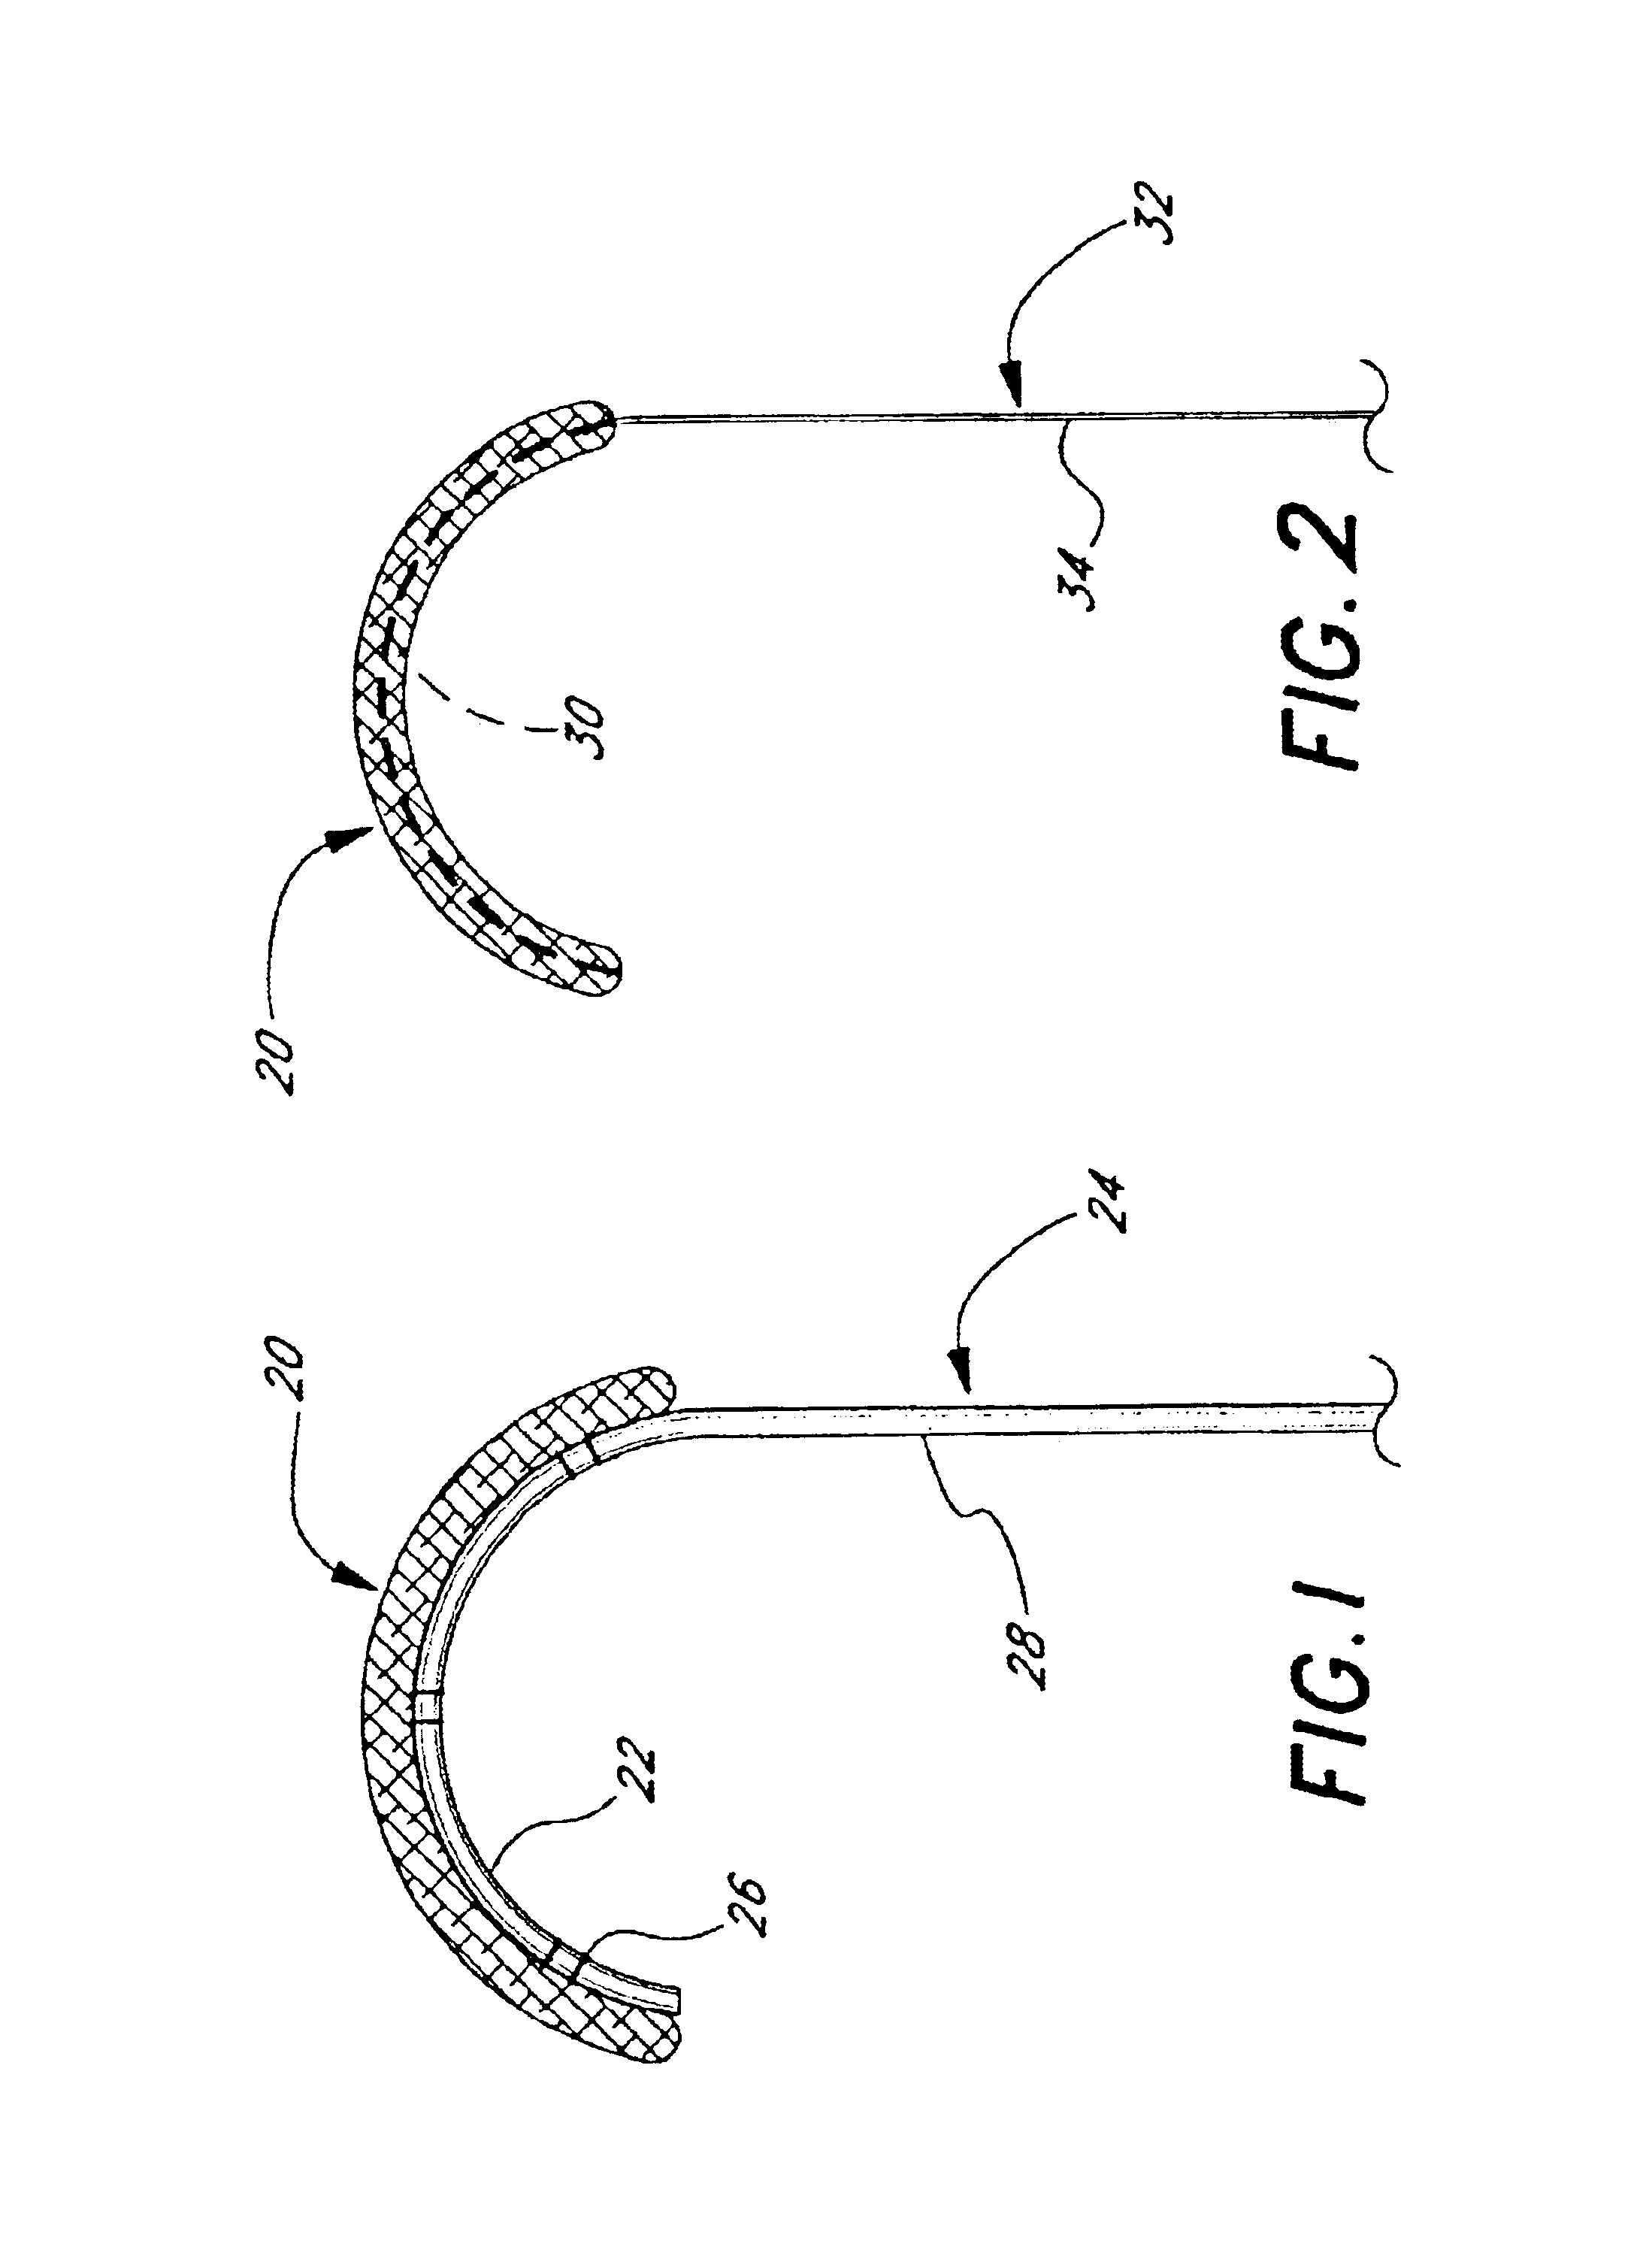 Minimally-invasive annuloplasty repair segment delivery template and system